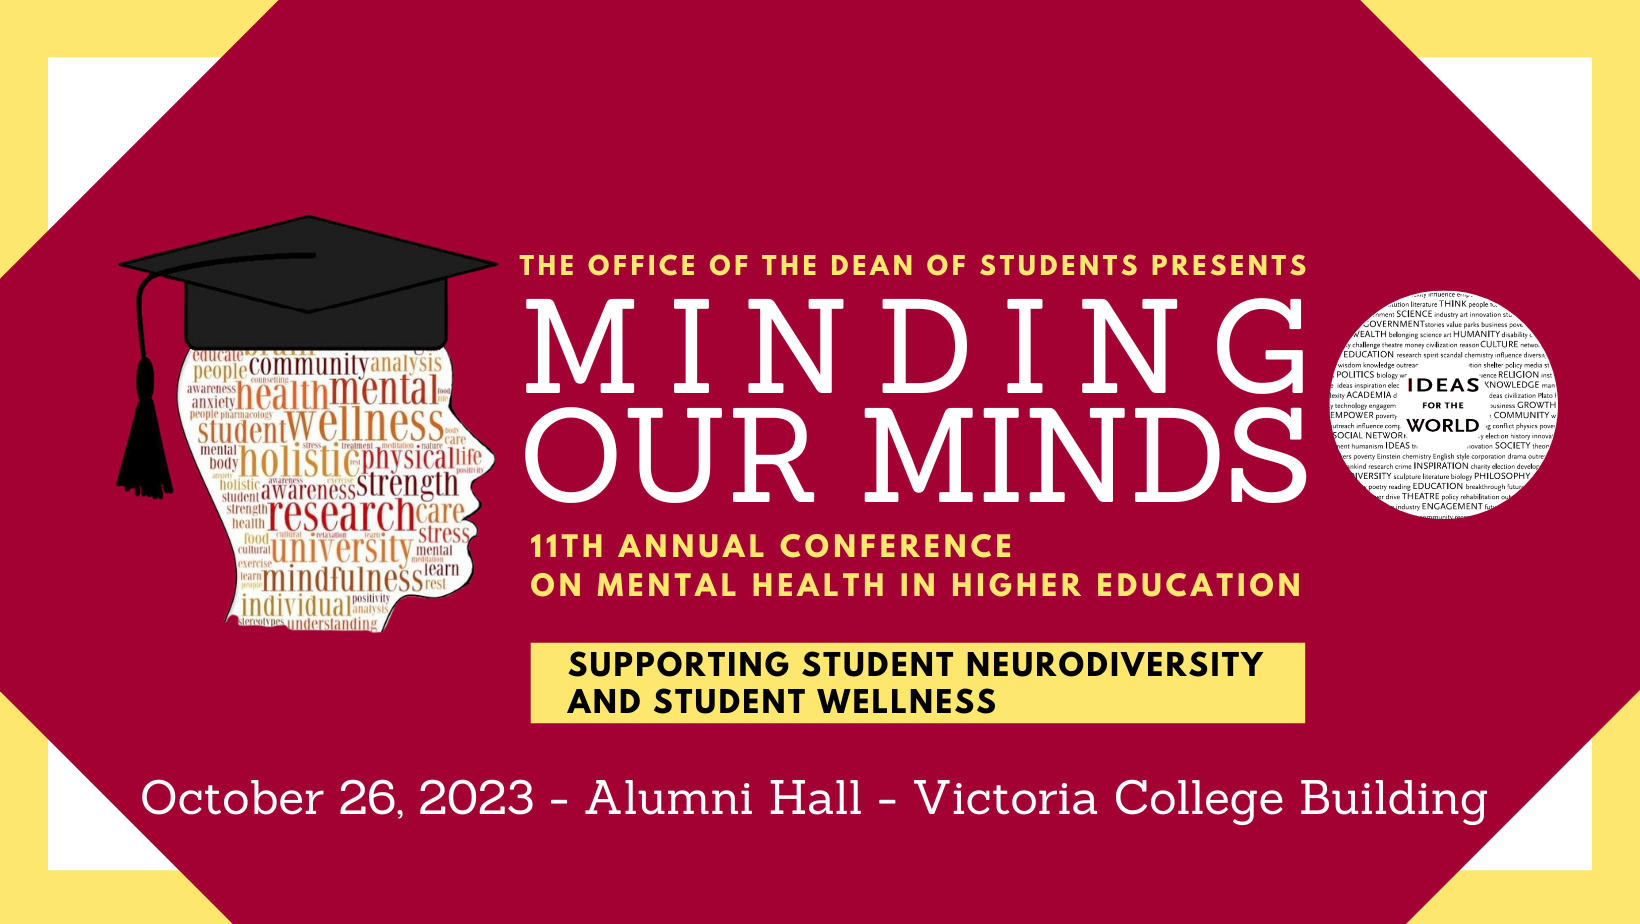 Minding our Minds 2023: Supporting Student Neurodiversity and Student Wellness